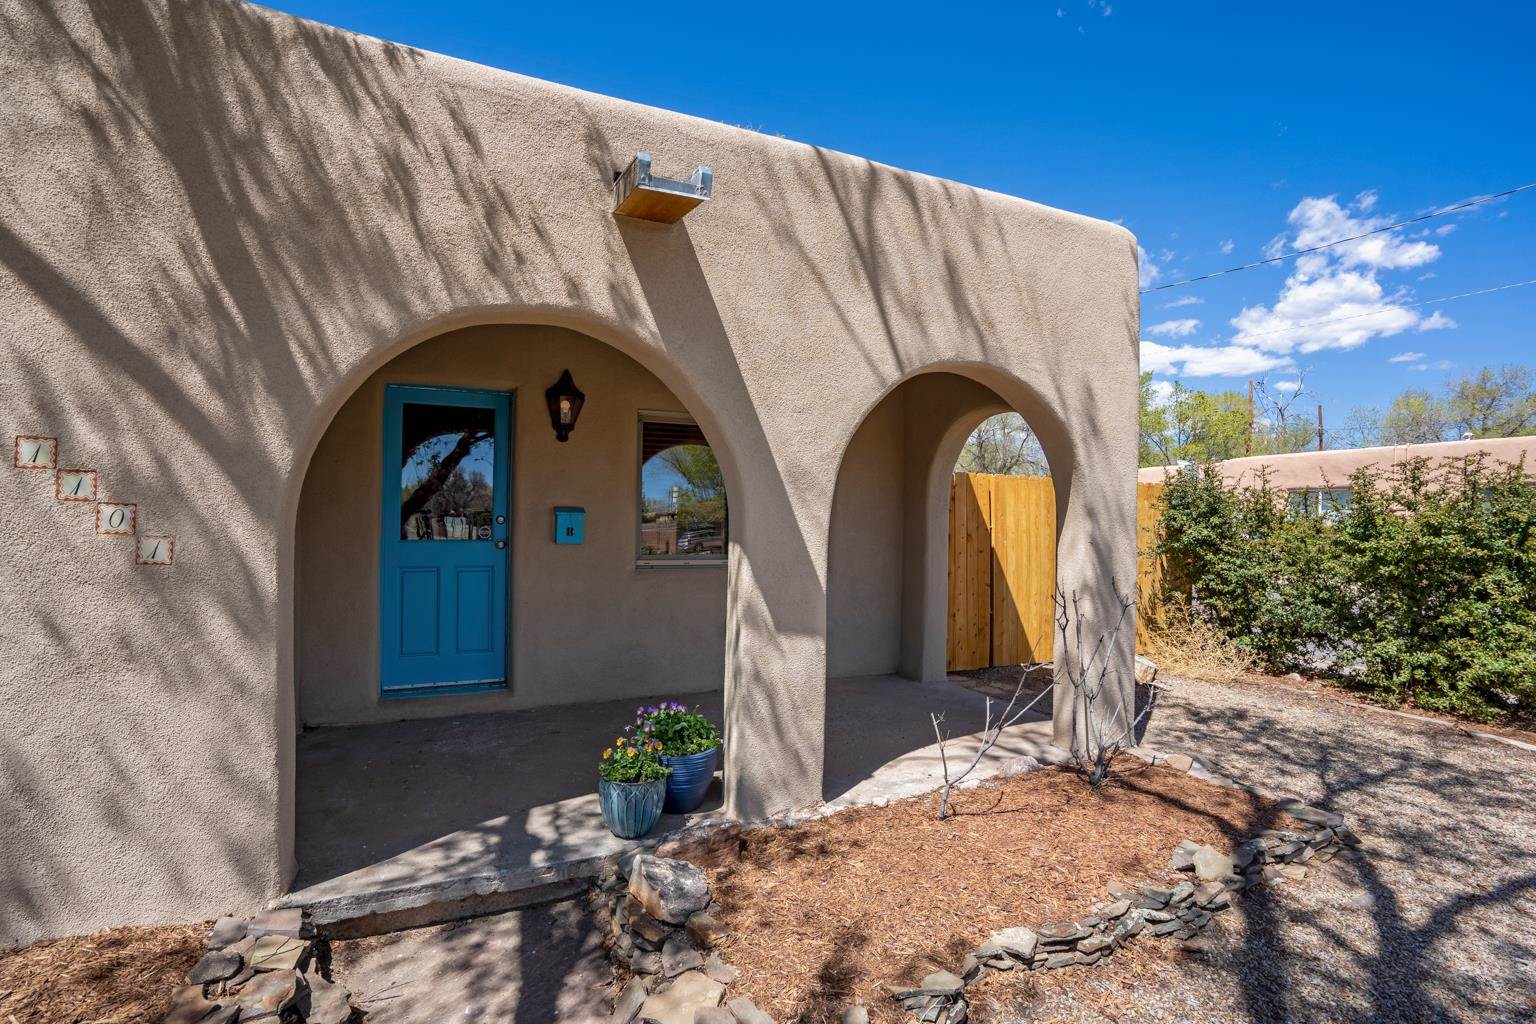 1101 Hickox, Santa Fe, New Mexico 87505, 3 Bedrooms Bedrooms, ,2 BathroomsBathrooms,Residential,For Sale,1101 Hickox,202101784